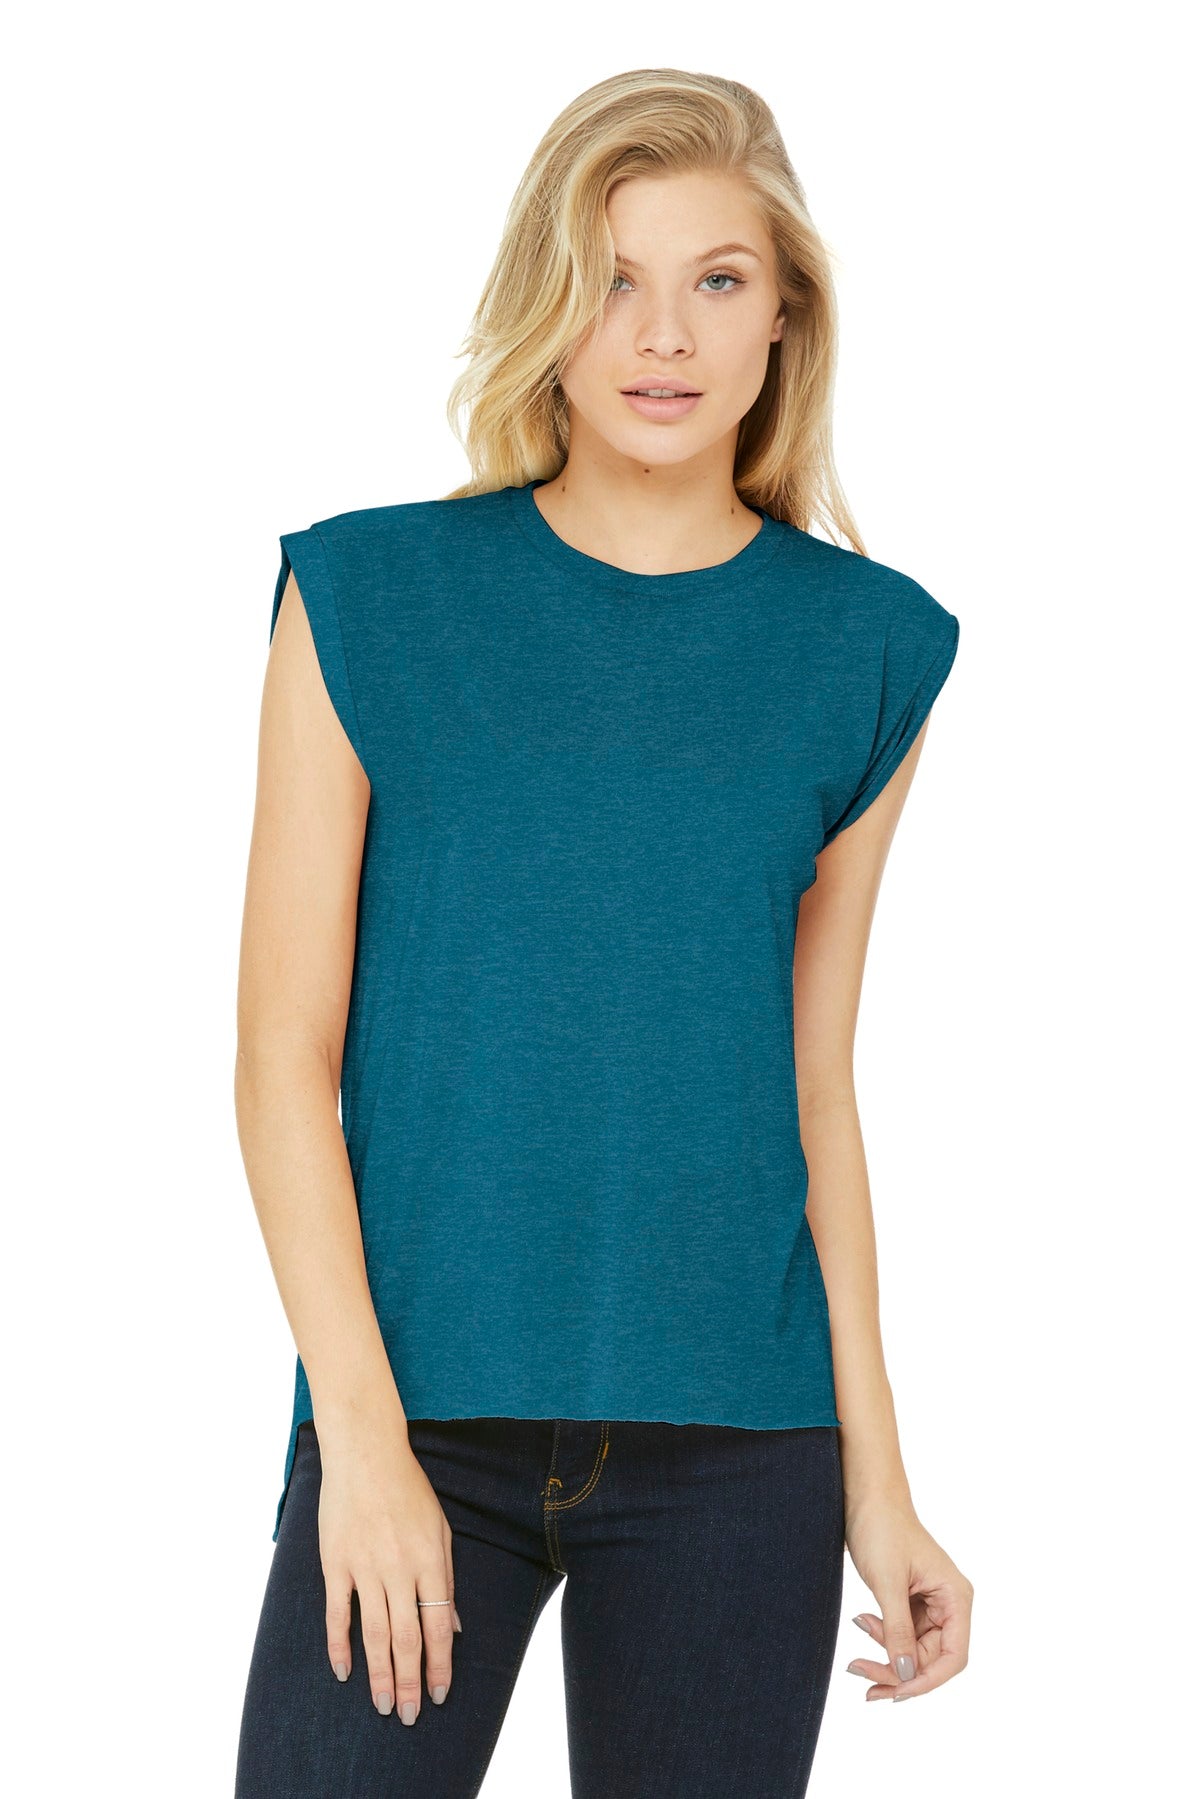 BELLA+CANVAS ® Women's Flowy Muscle Tee With Rolled Cuffs. BC8804